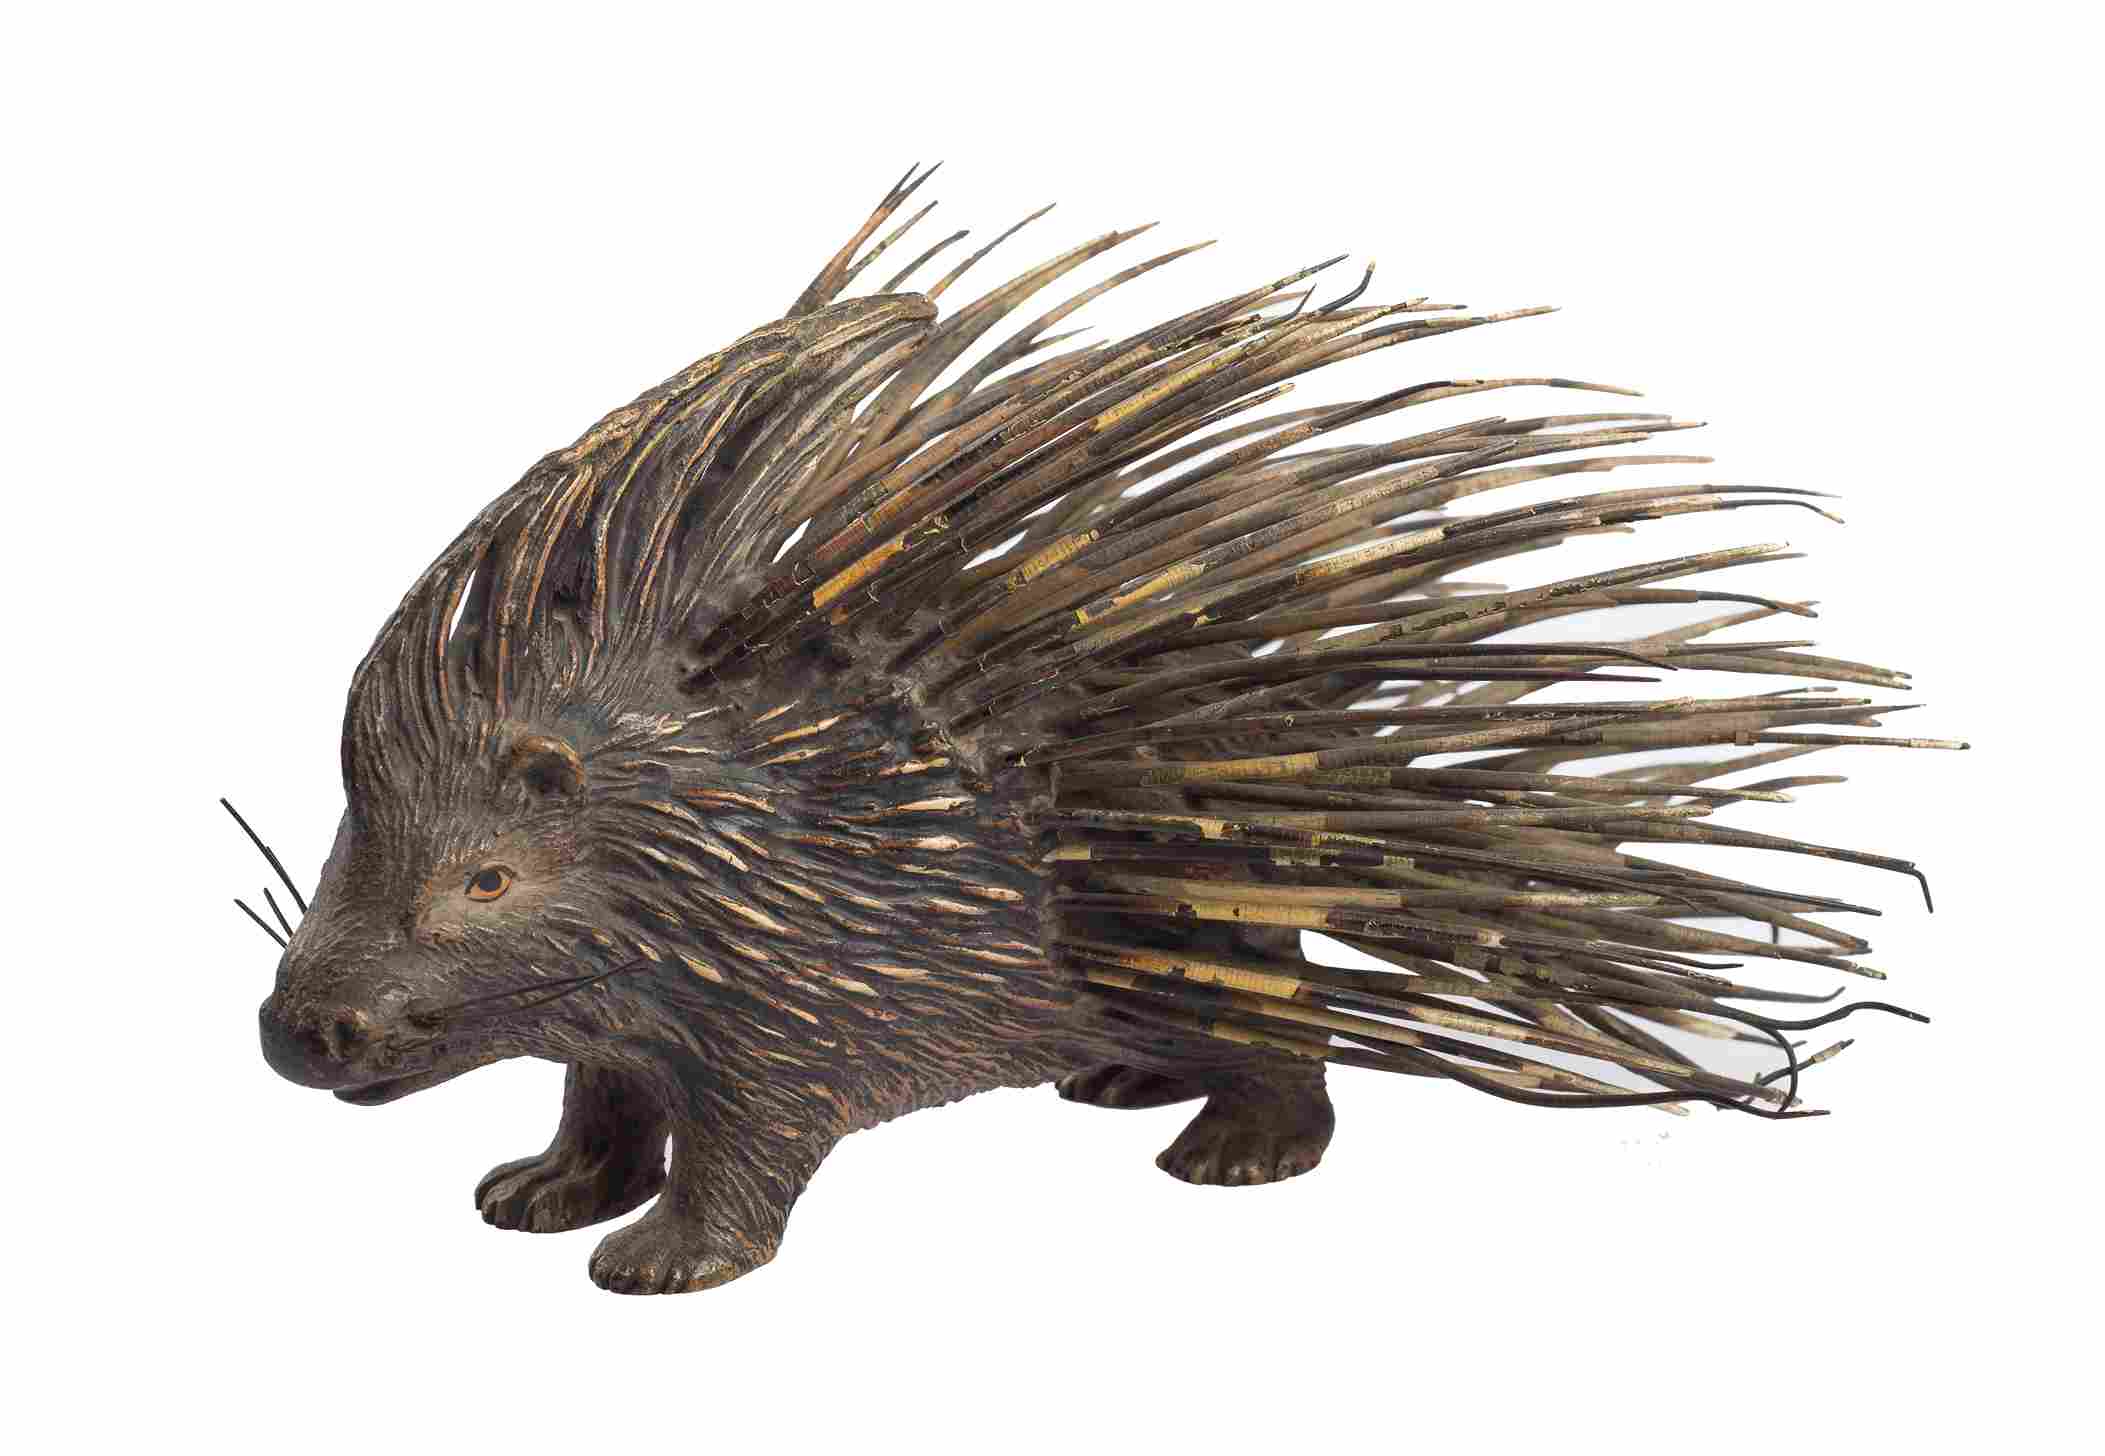 A small sculpture of a porcupine, made of what looks to be bronze.